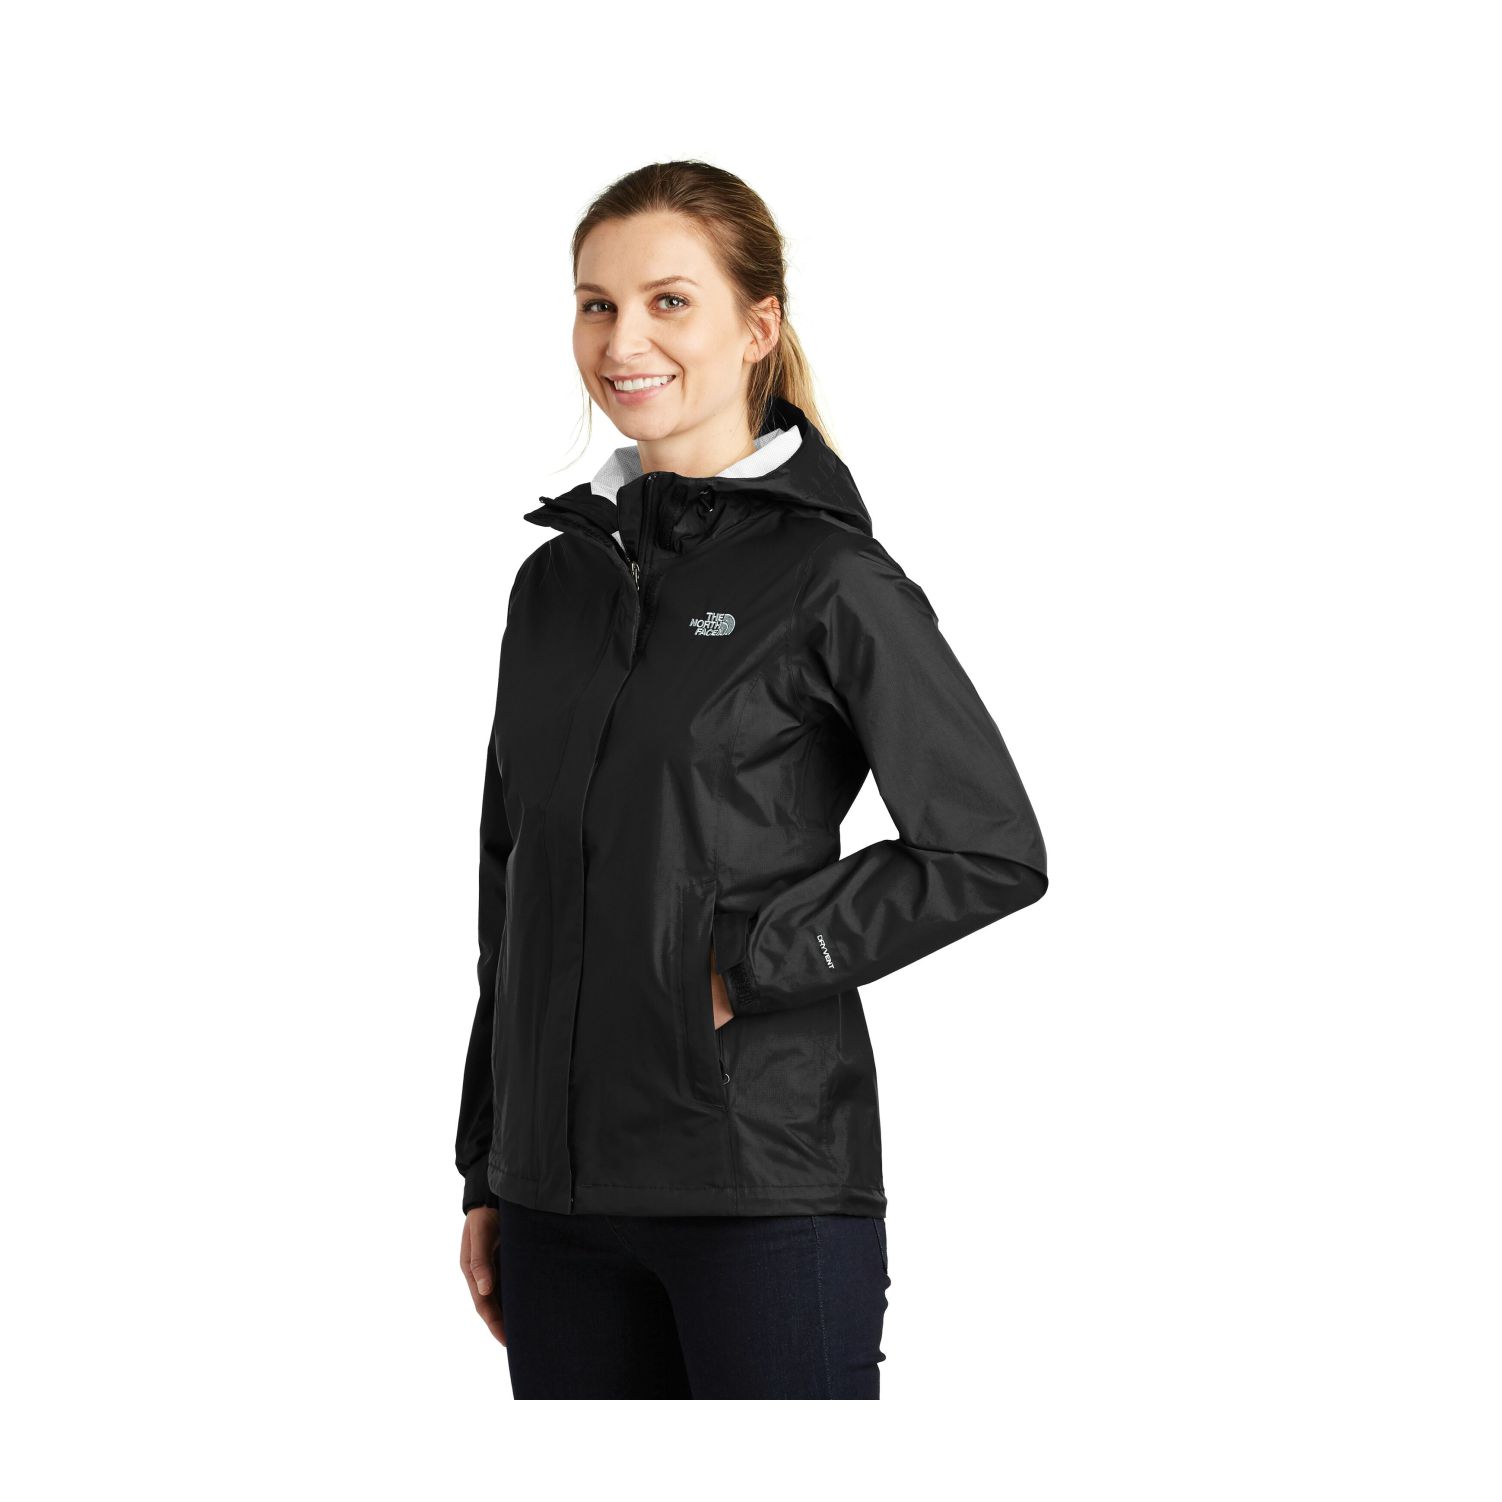 THE NORTH FACE DRYVENT LADIES' RAIN JACKET #NF0A3LH5 Black Side